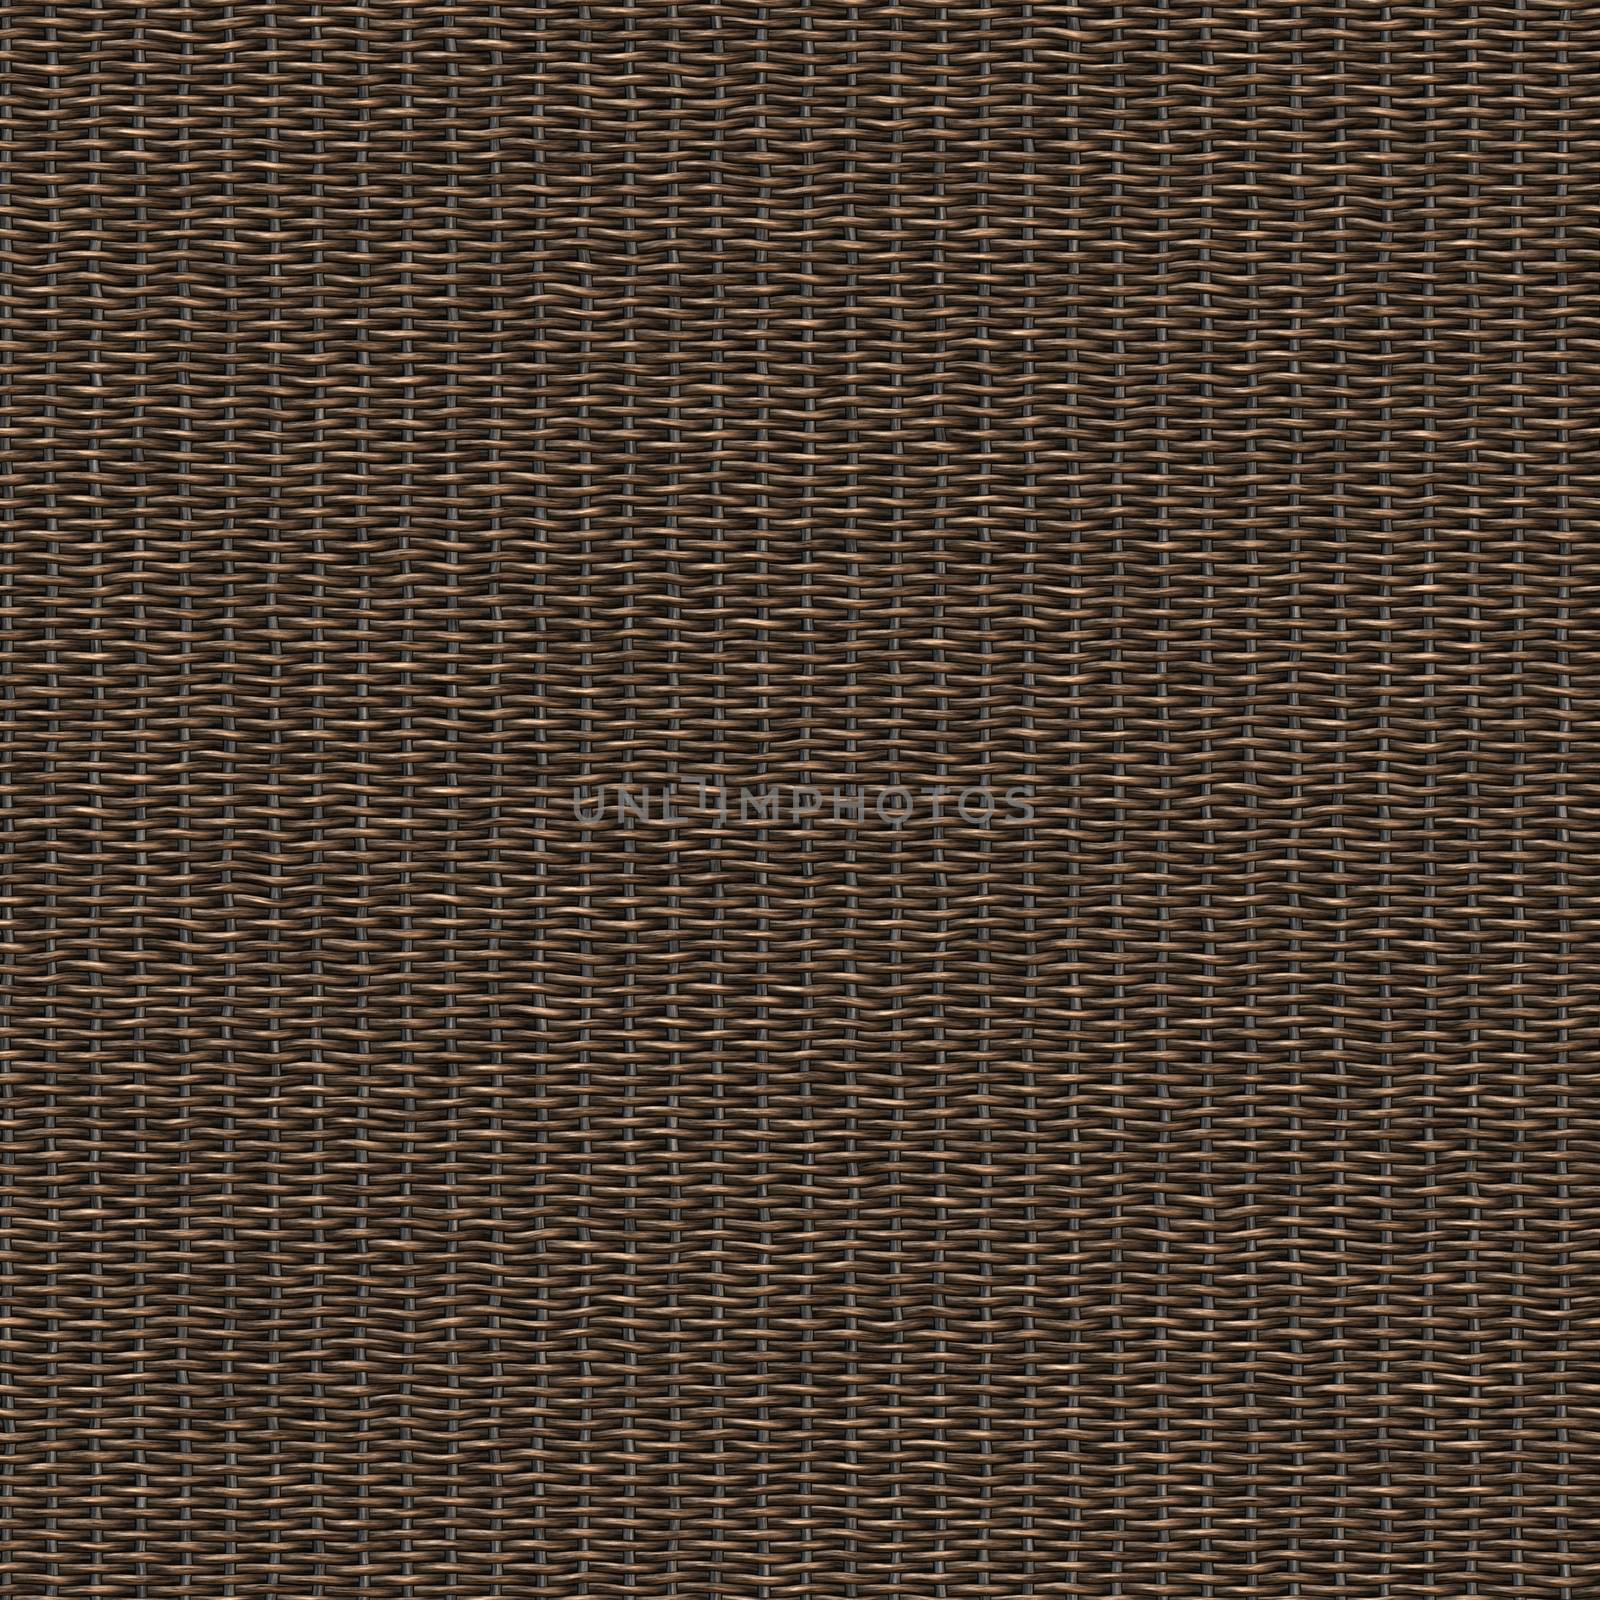 Natural Wicker Horizontal Background Or Texture, Close Up, Copy Space. Seamless pattern design.